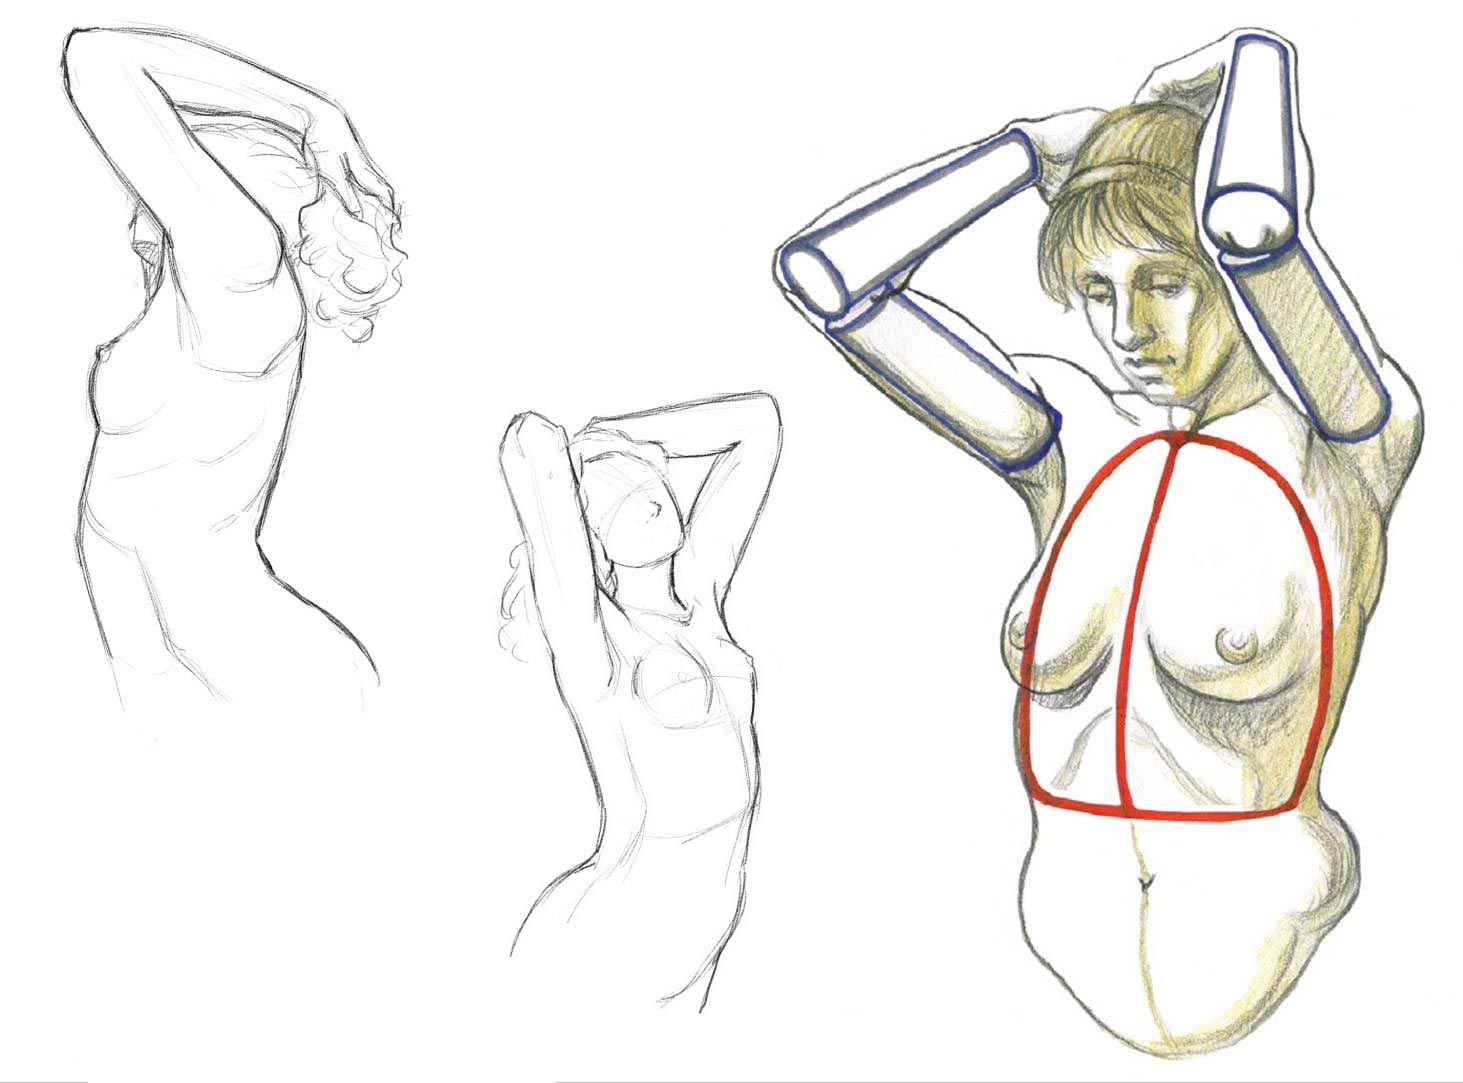 Arms behind head drawing reference